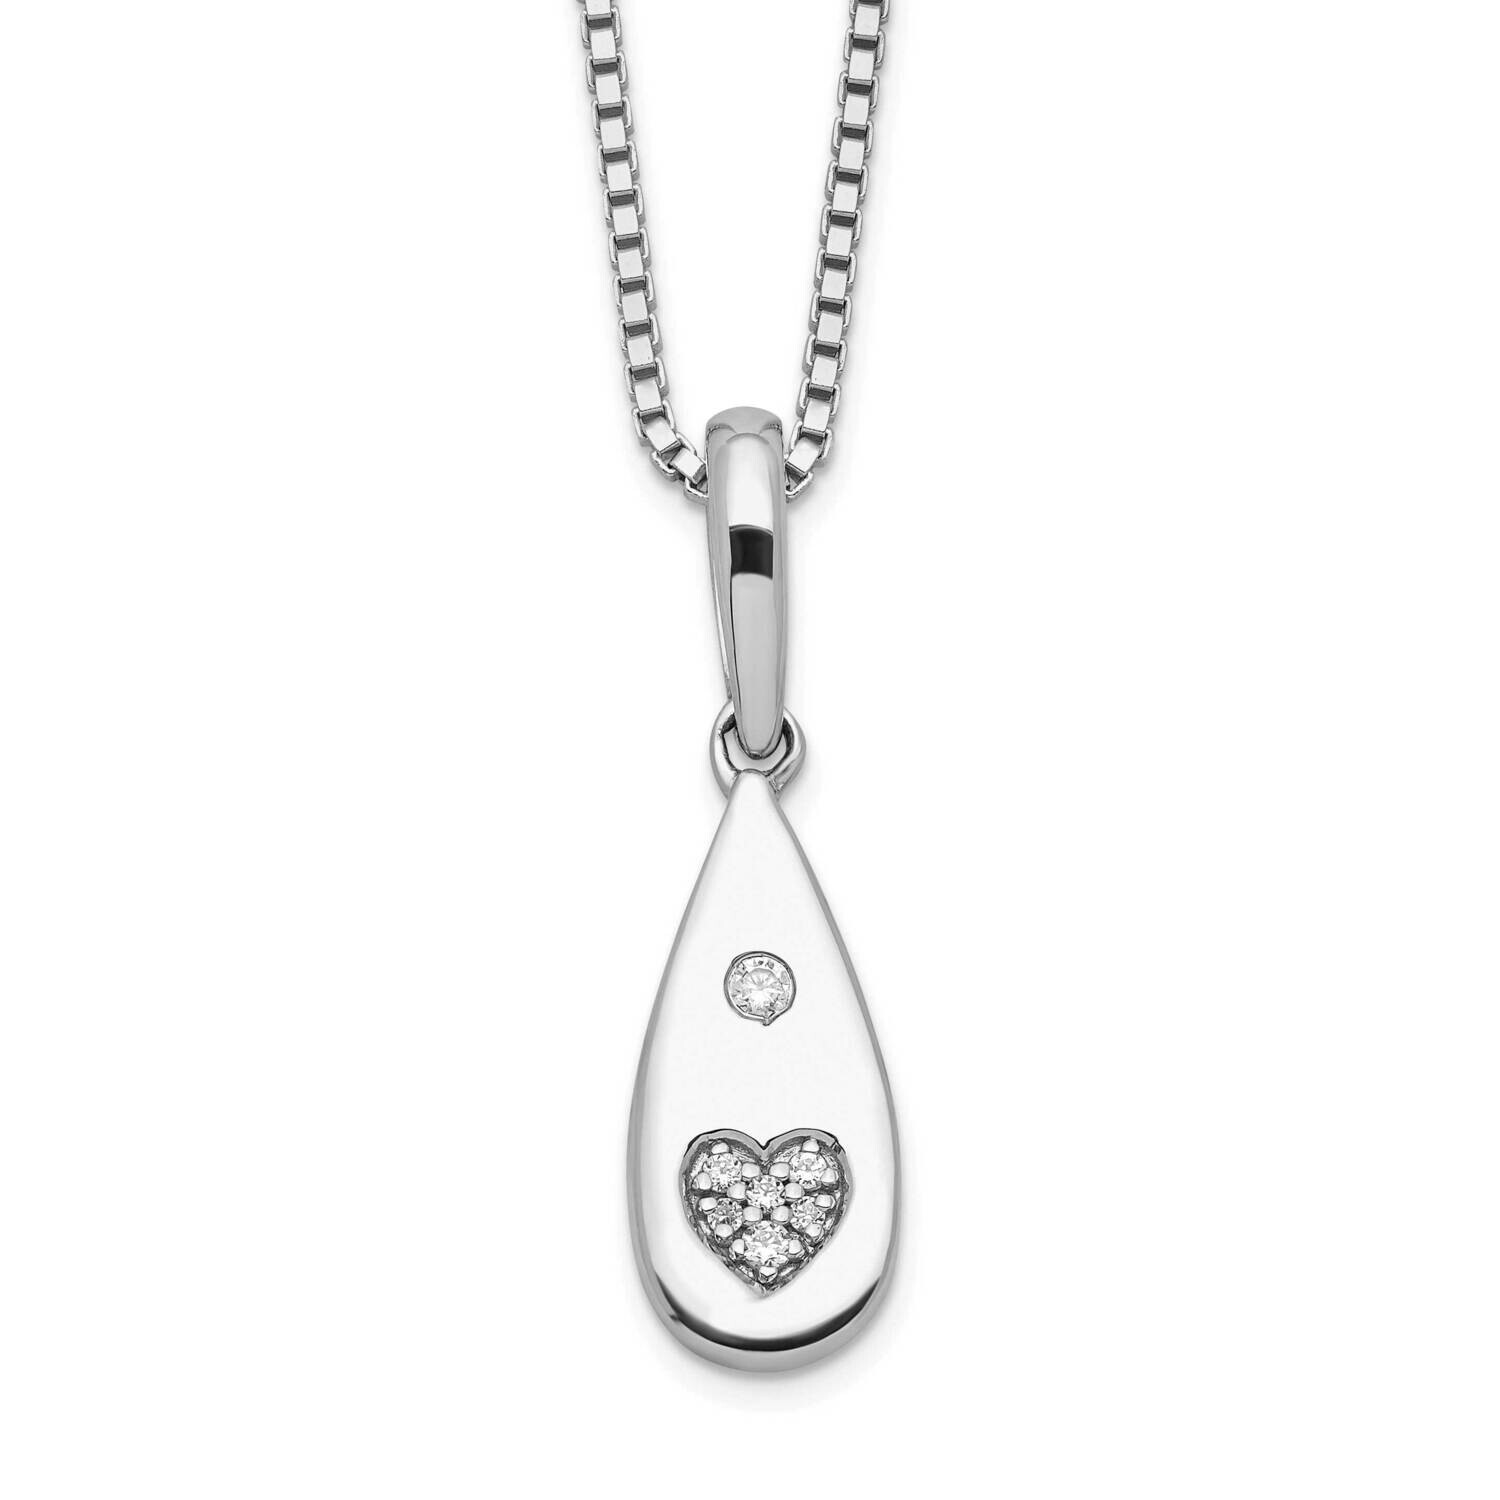 White Ice 18 Inch Diamond Heart Teardrop Necklace 2 Inch Extender Sterling Silver Rhodium-Plated QW528-18